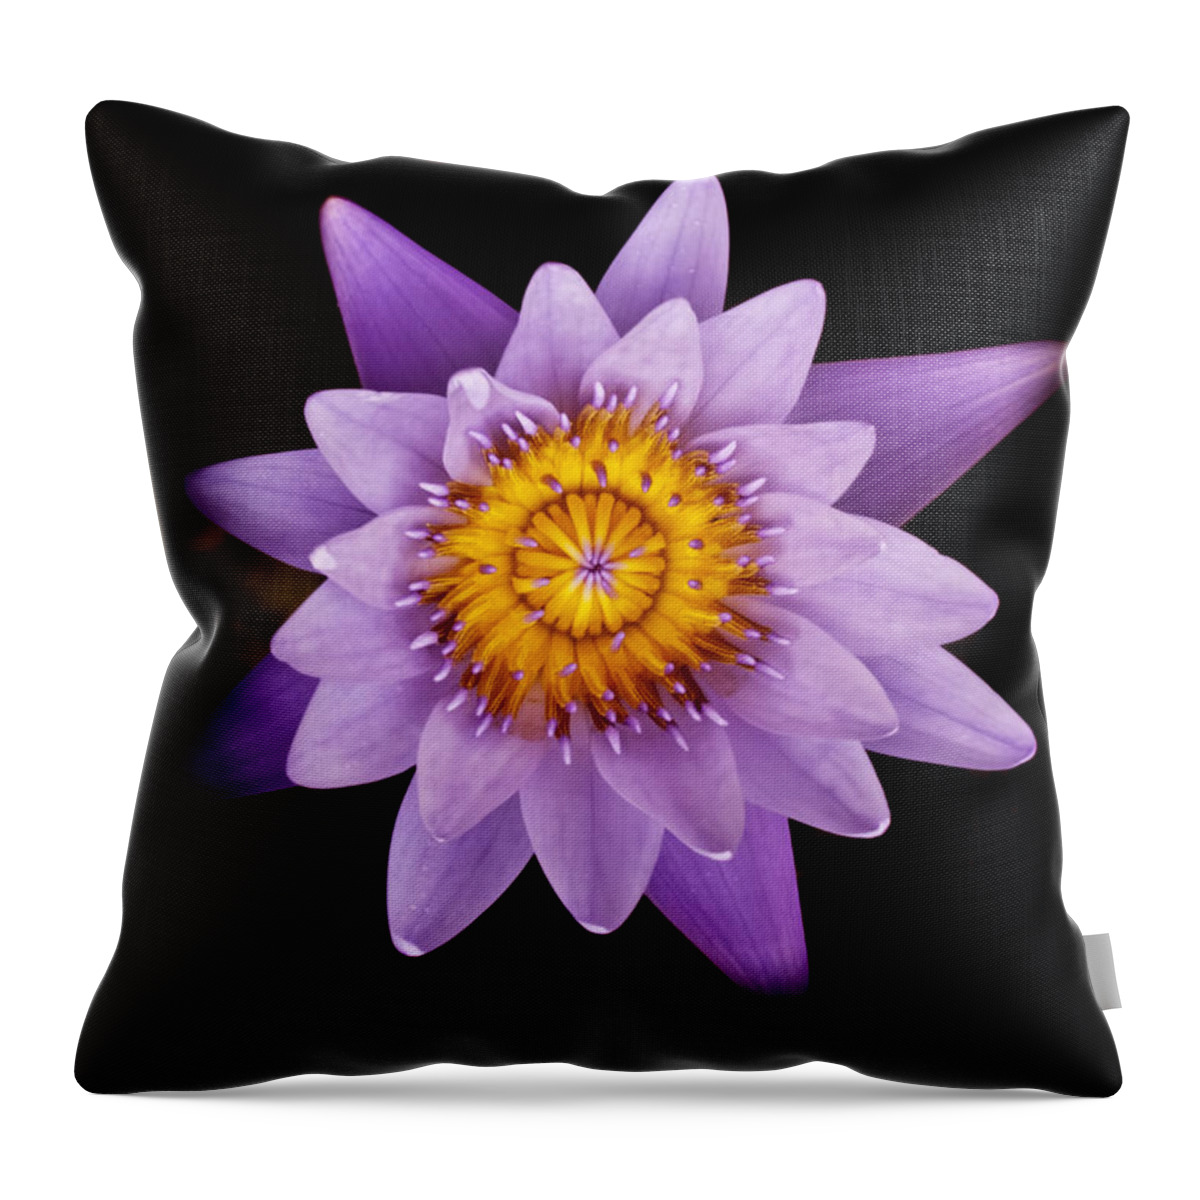 Alone Throw Pillow featuring the photograph Lavender Water Liliy III by Joe Carini - Printscapes